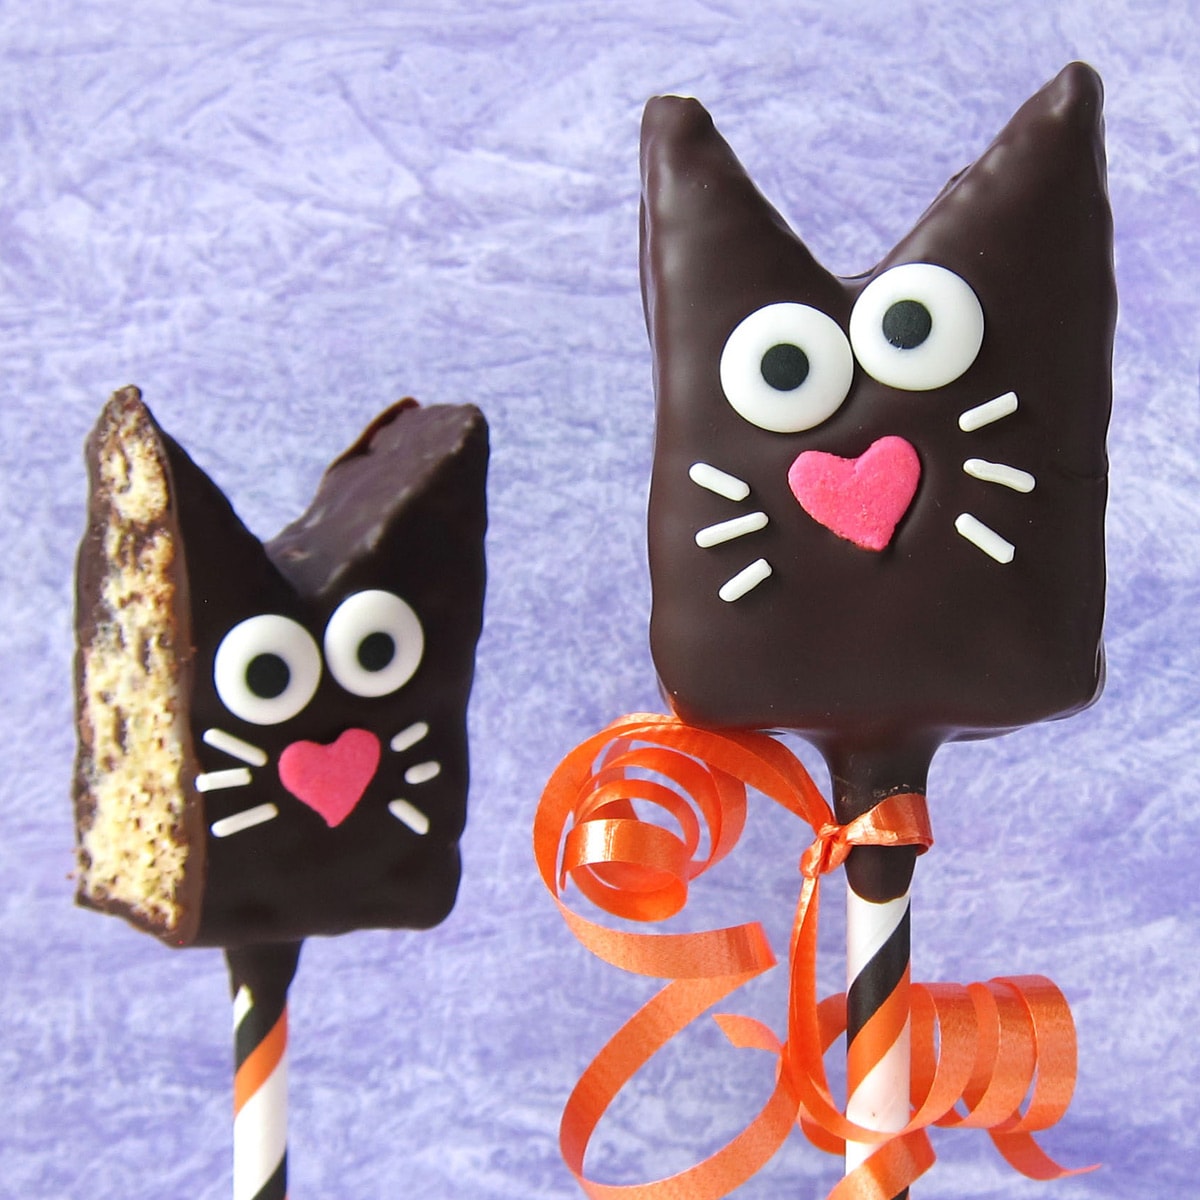 Rice Krispie Treat cats coated in dark chocolate and decorated with candy eyes, pink heart-shaped noses, and sprinkle whiskers.